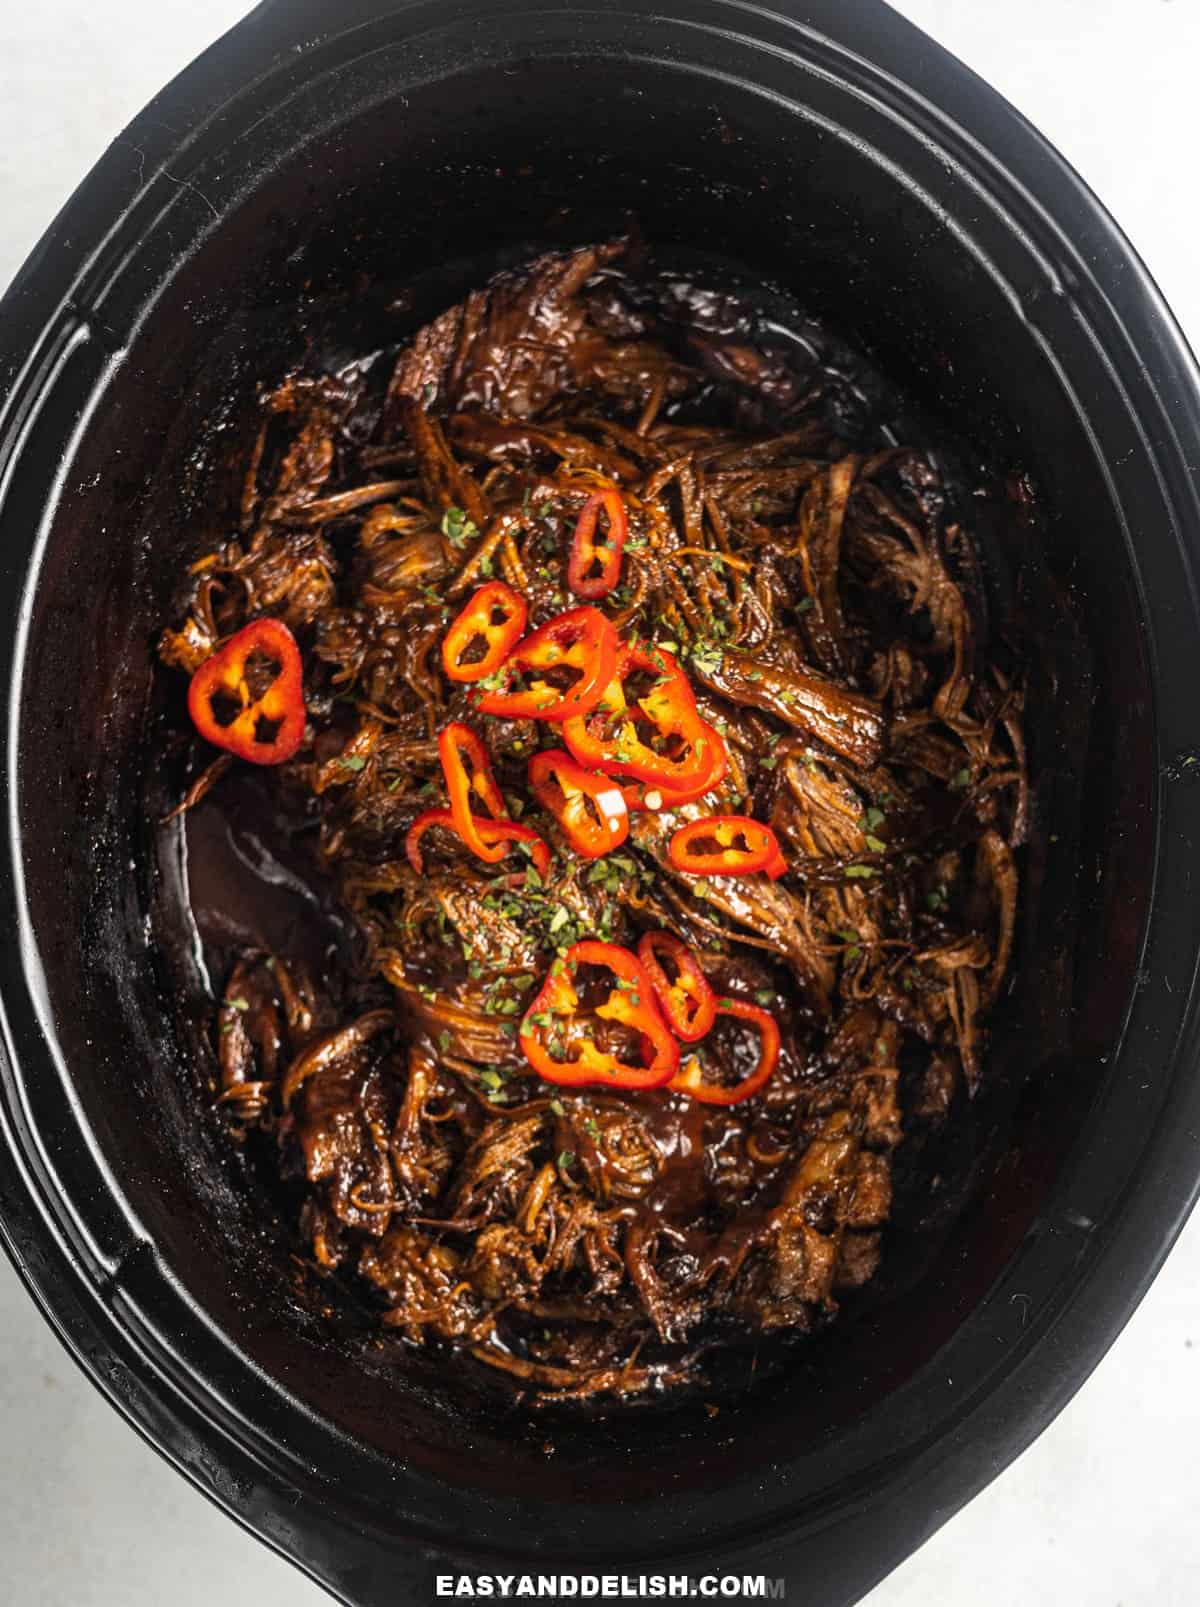 shredded brisket in a slow cooker garnished with hot red peppers.